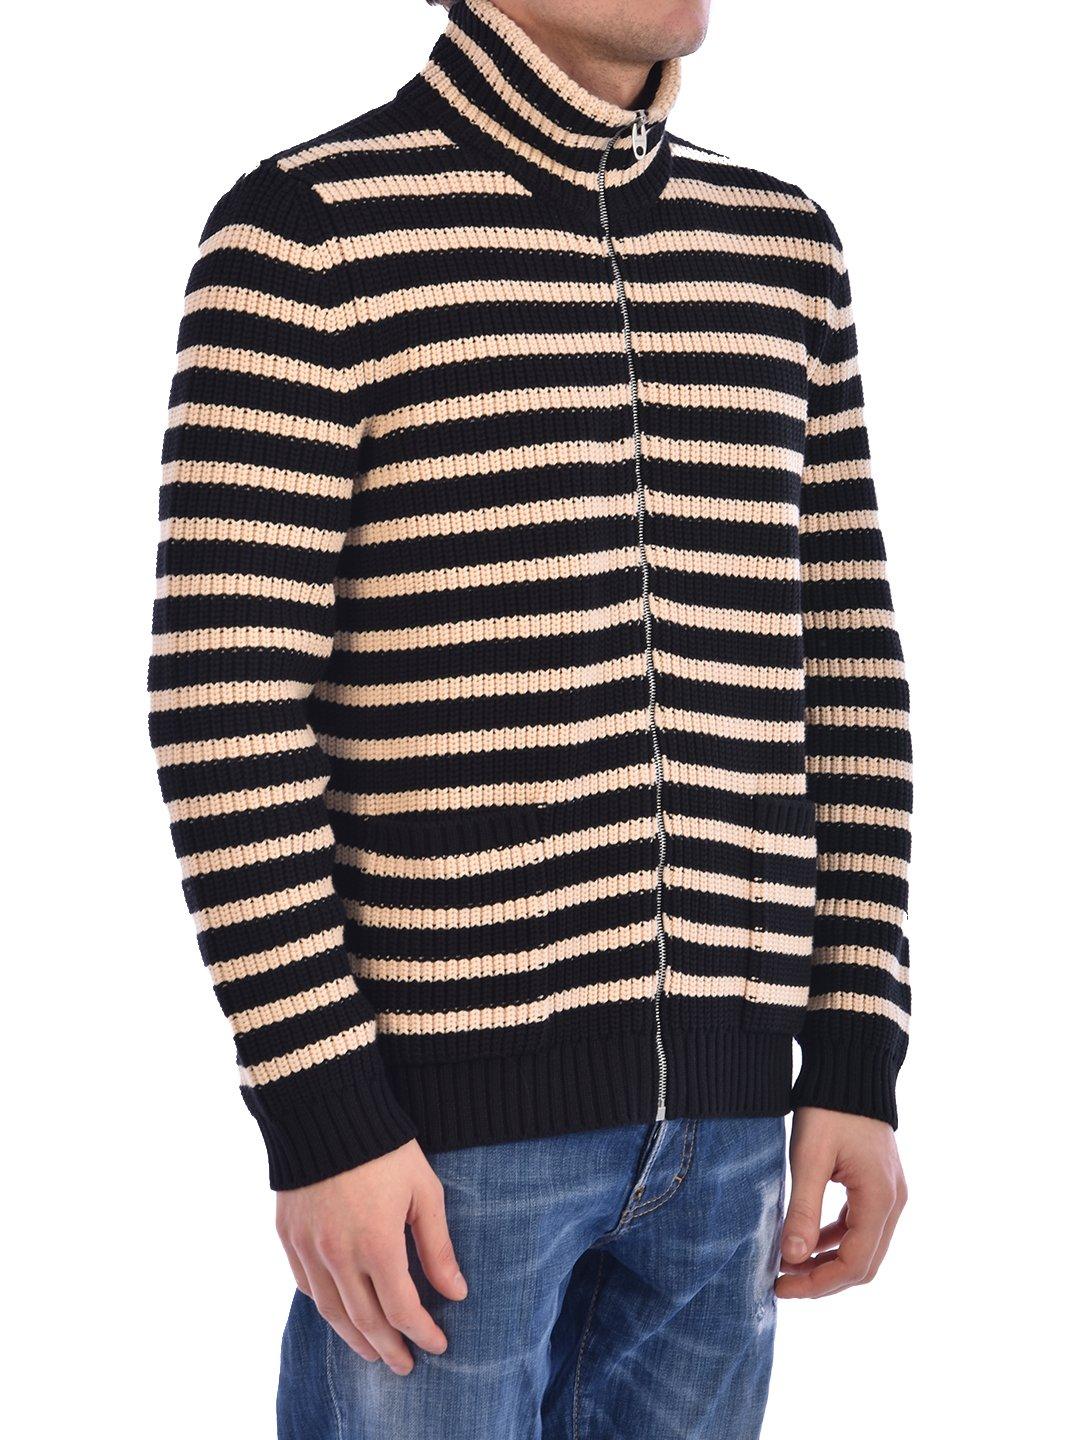 Gucci Cotton Striped Zipped Sweater in Blue for Men - Lyst